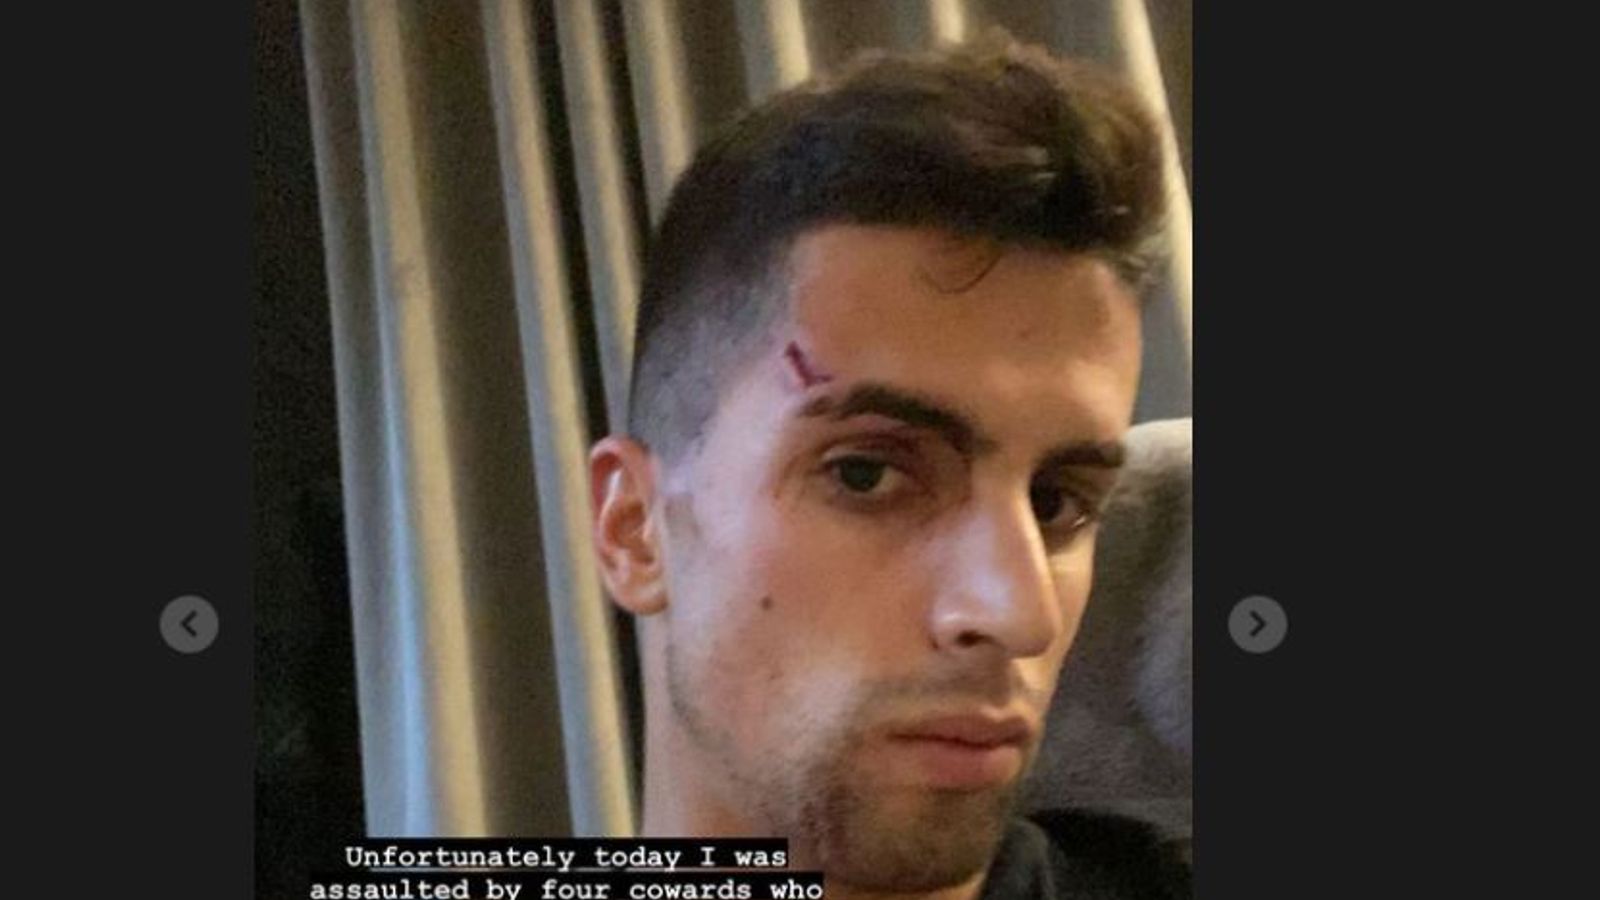 Joao Cancelo: Manchester City full-back suffers facial injuries after alleged assault and theft